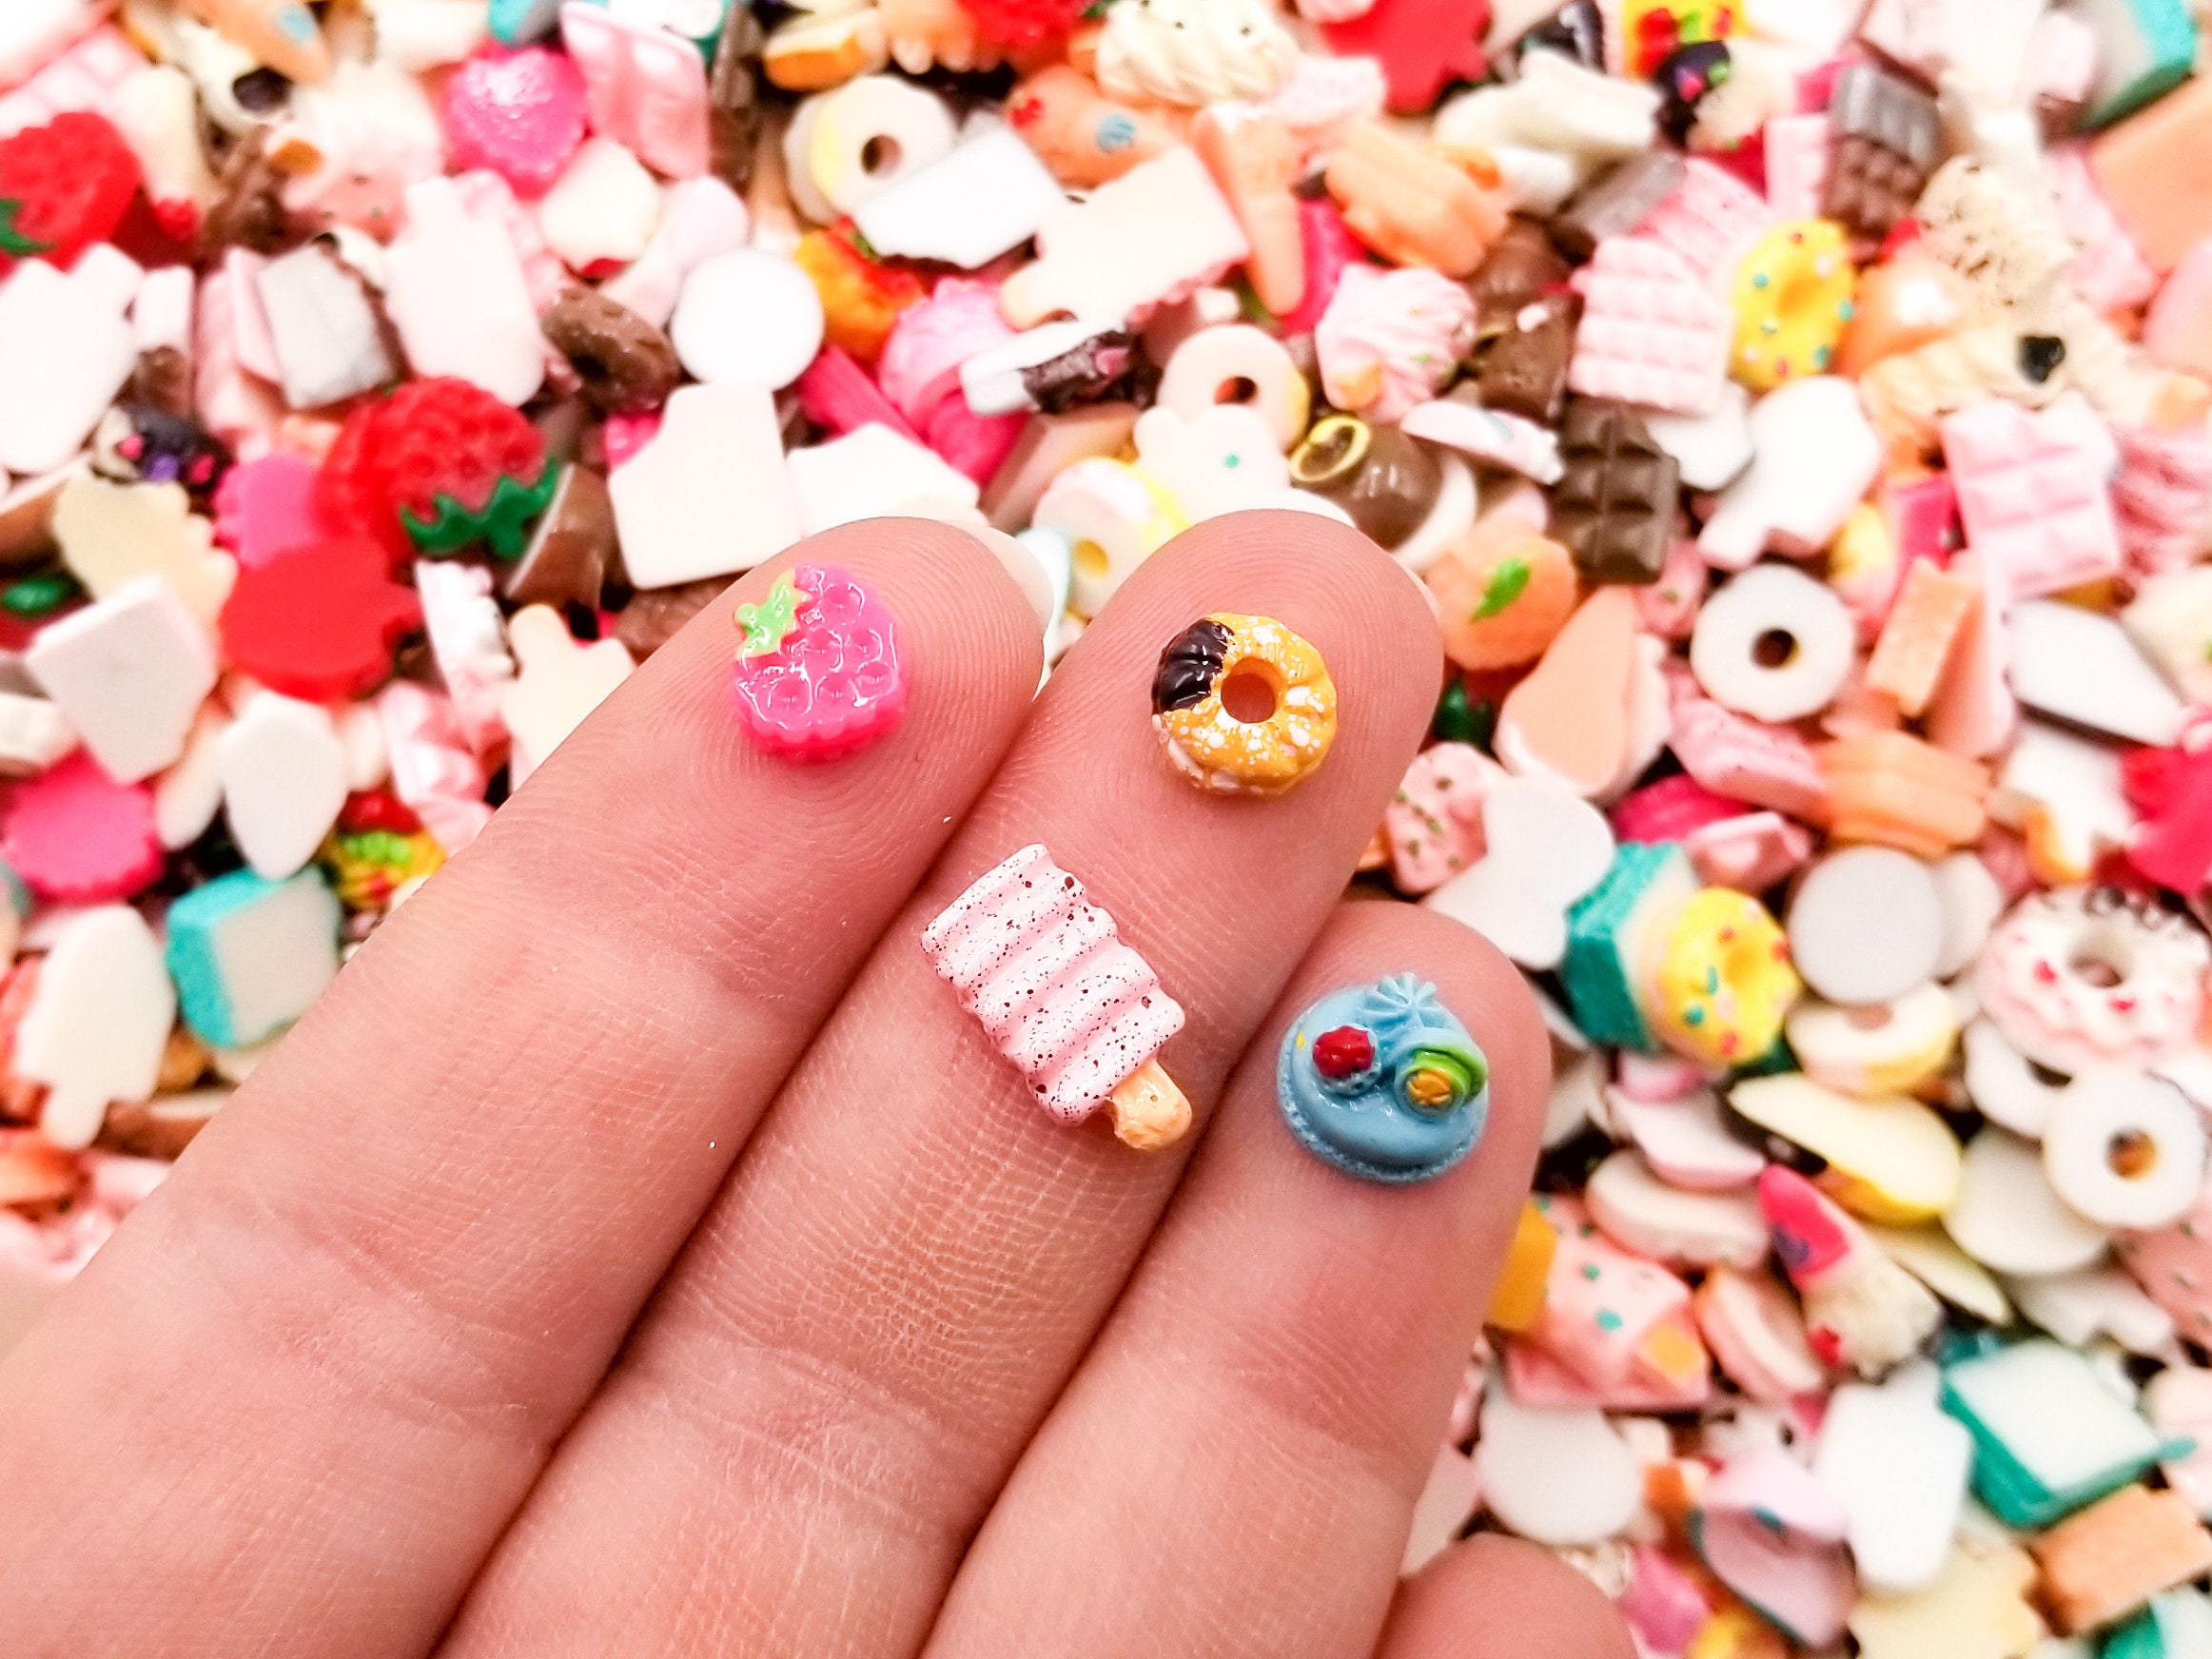 100Pcs 3D Sugar Candy Lollipop Nail Charms Assorted Acrylic